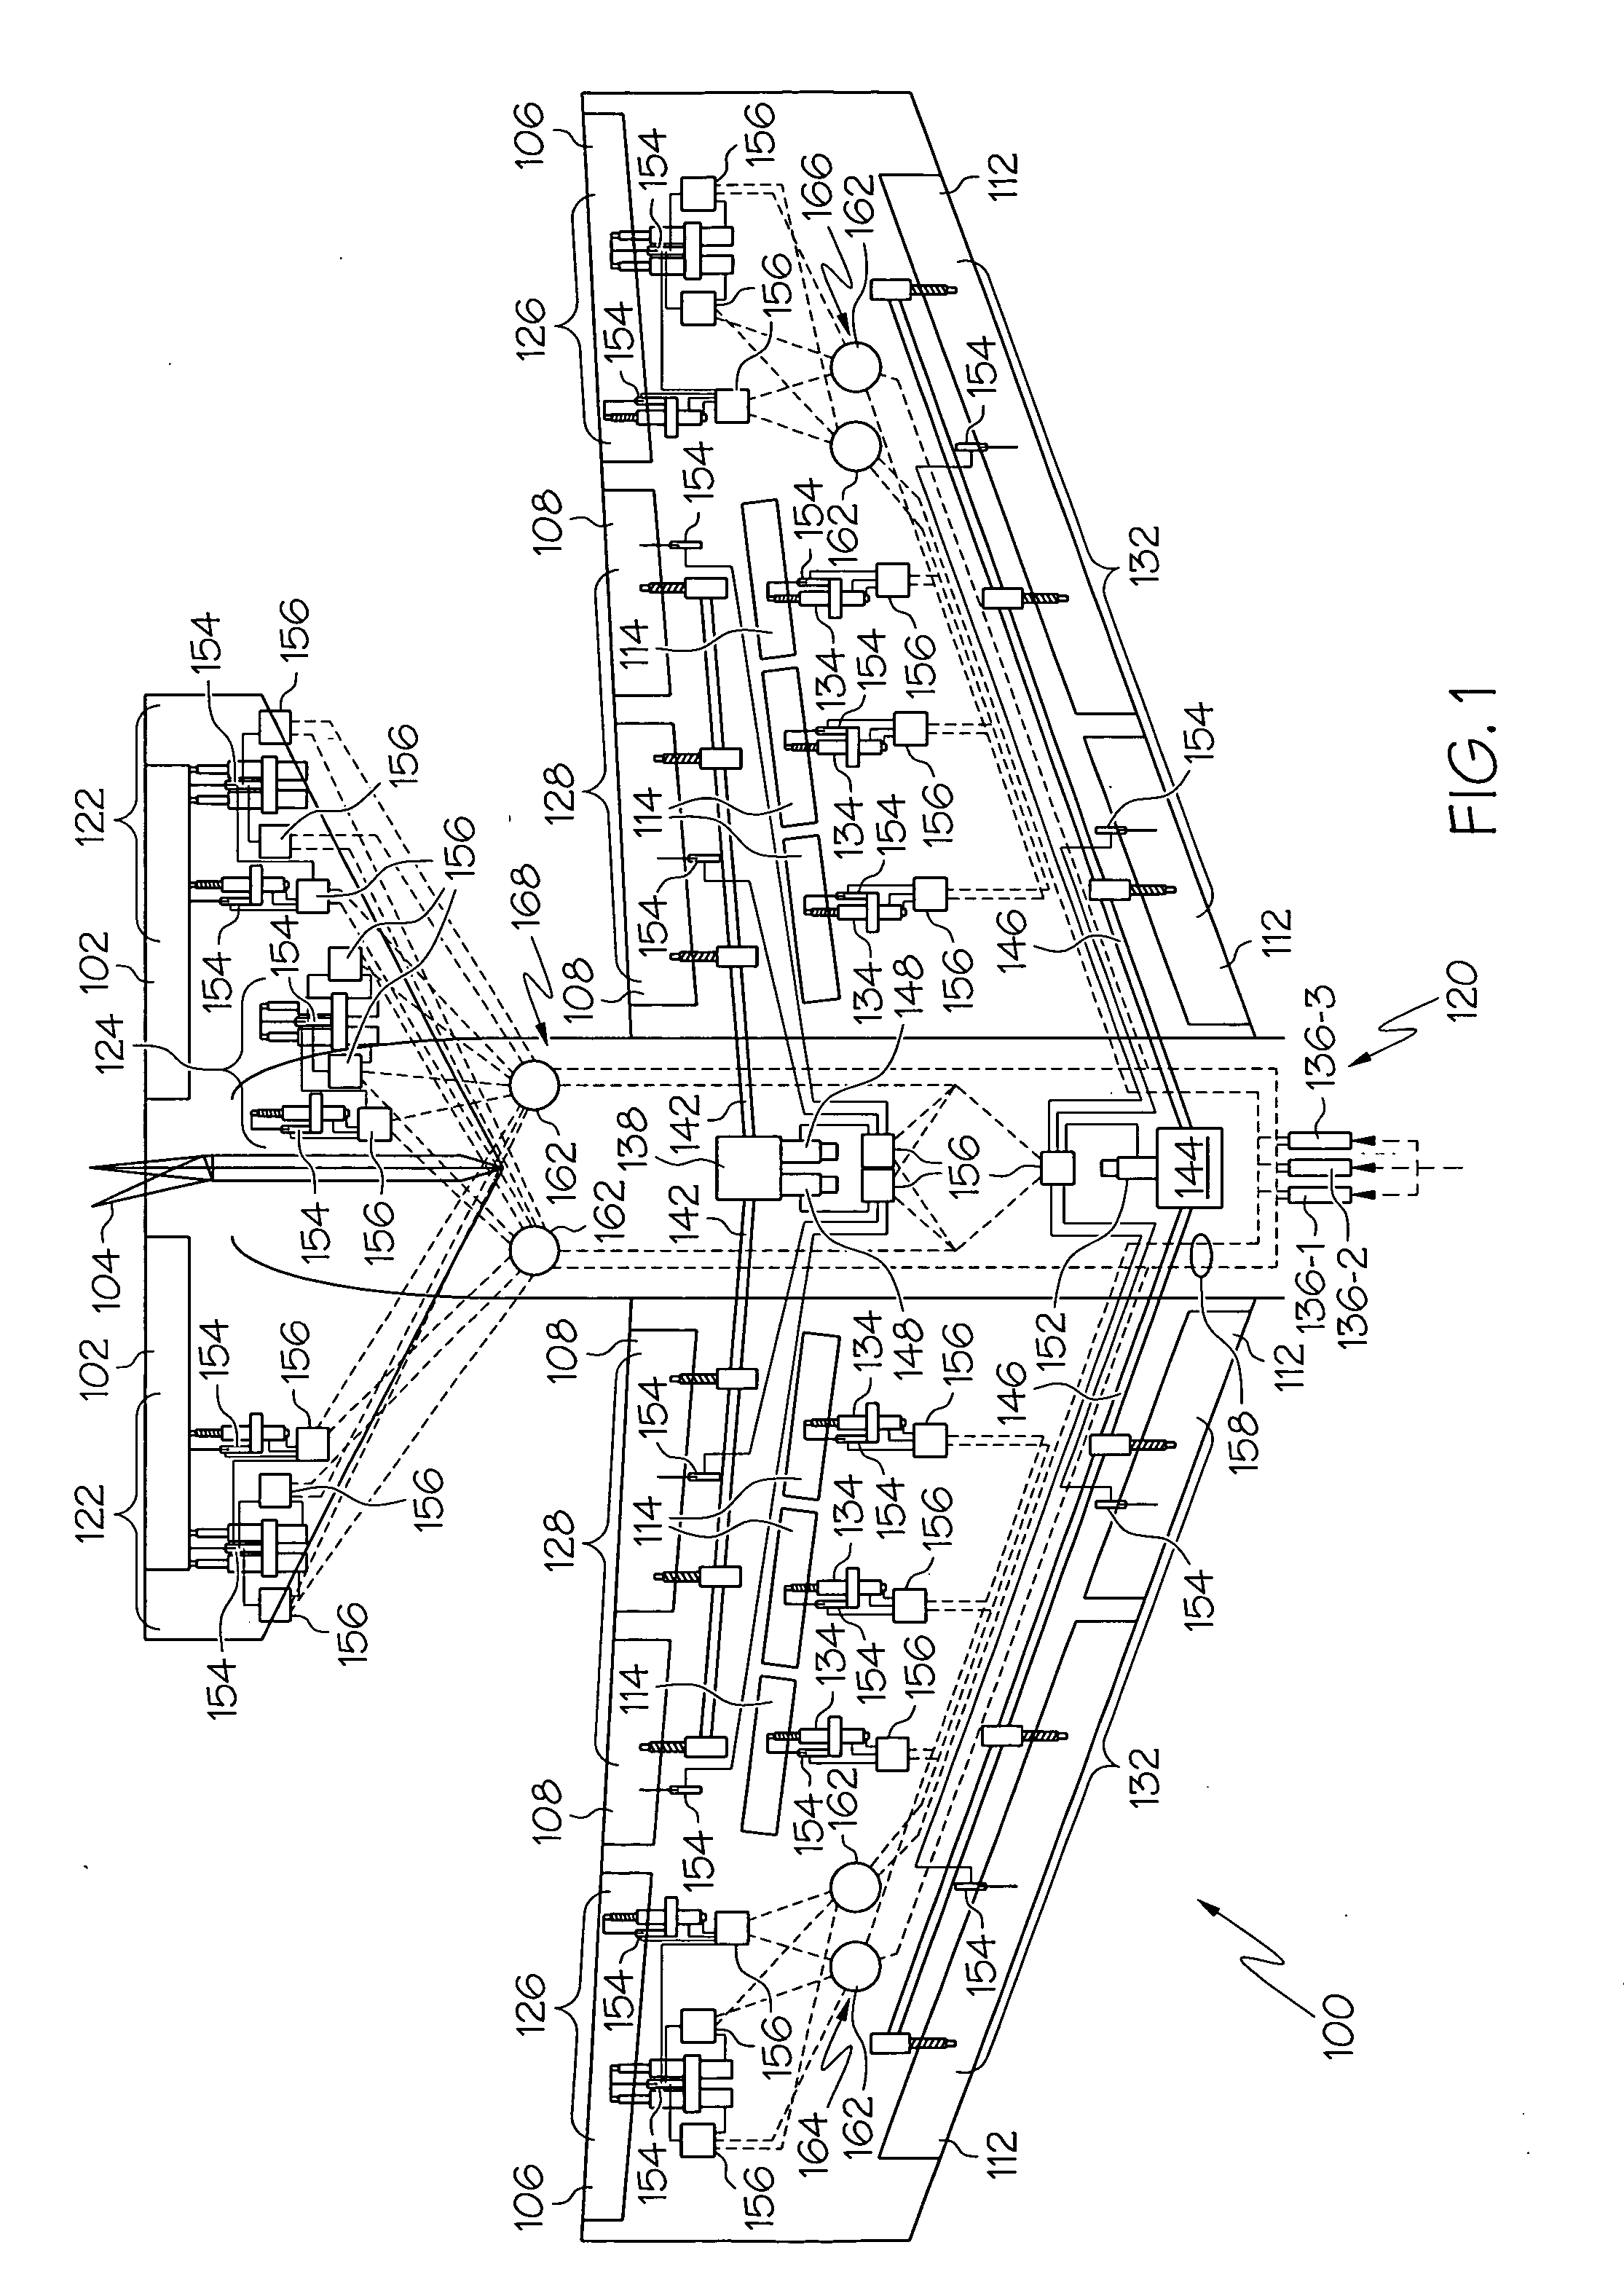 Aircraft flight control surface actuation system communication architecture